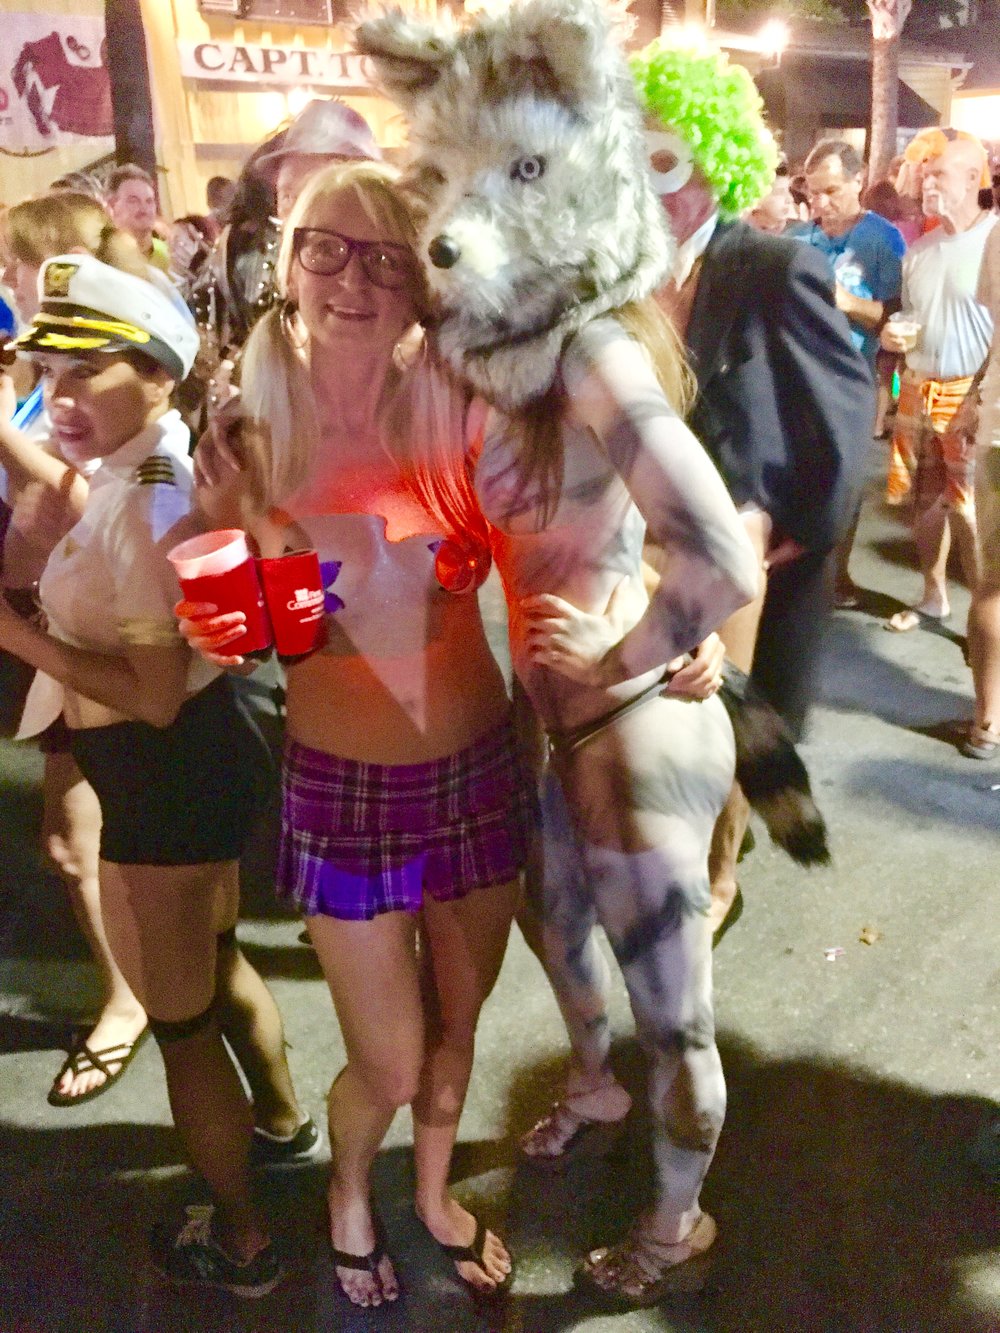  Alessandra Torre in wolf body paint at Fantasy Fest 2016 in Key West - nude with crowdgoer 